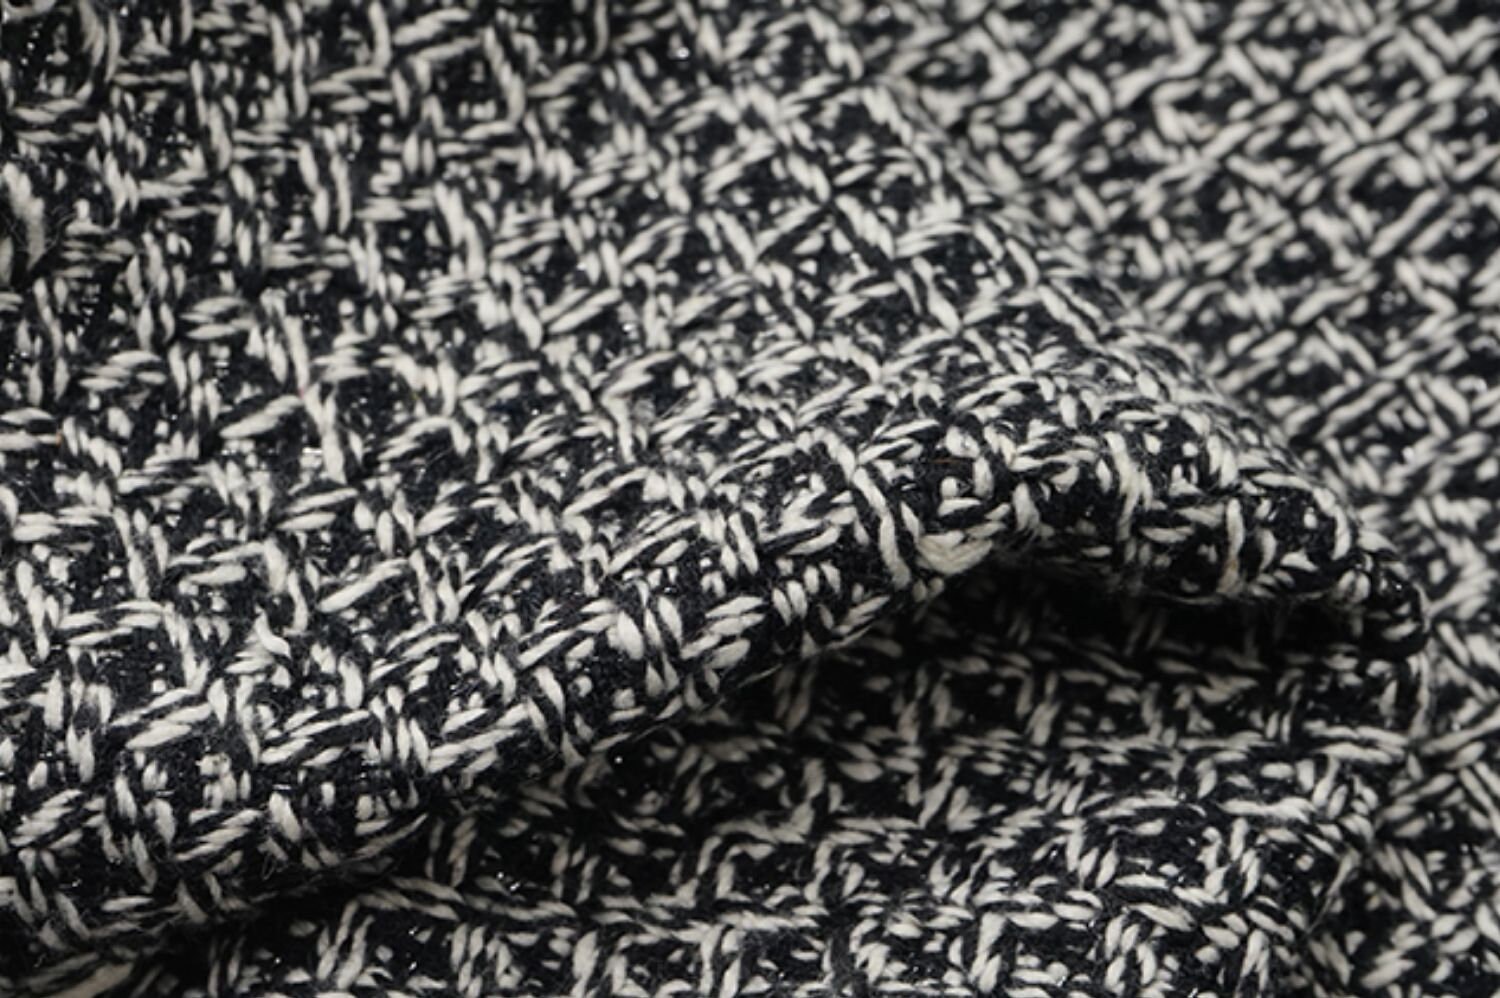 Black and White Fabric Herringbone Tweed-look in Black and White by  Willowlanetextiles Printed Cotton Fabric by the Yard With Spoonflower 